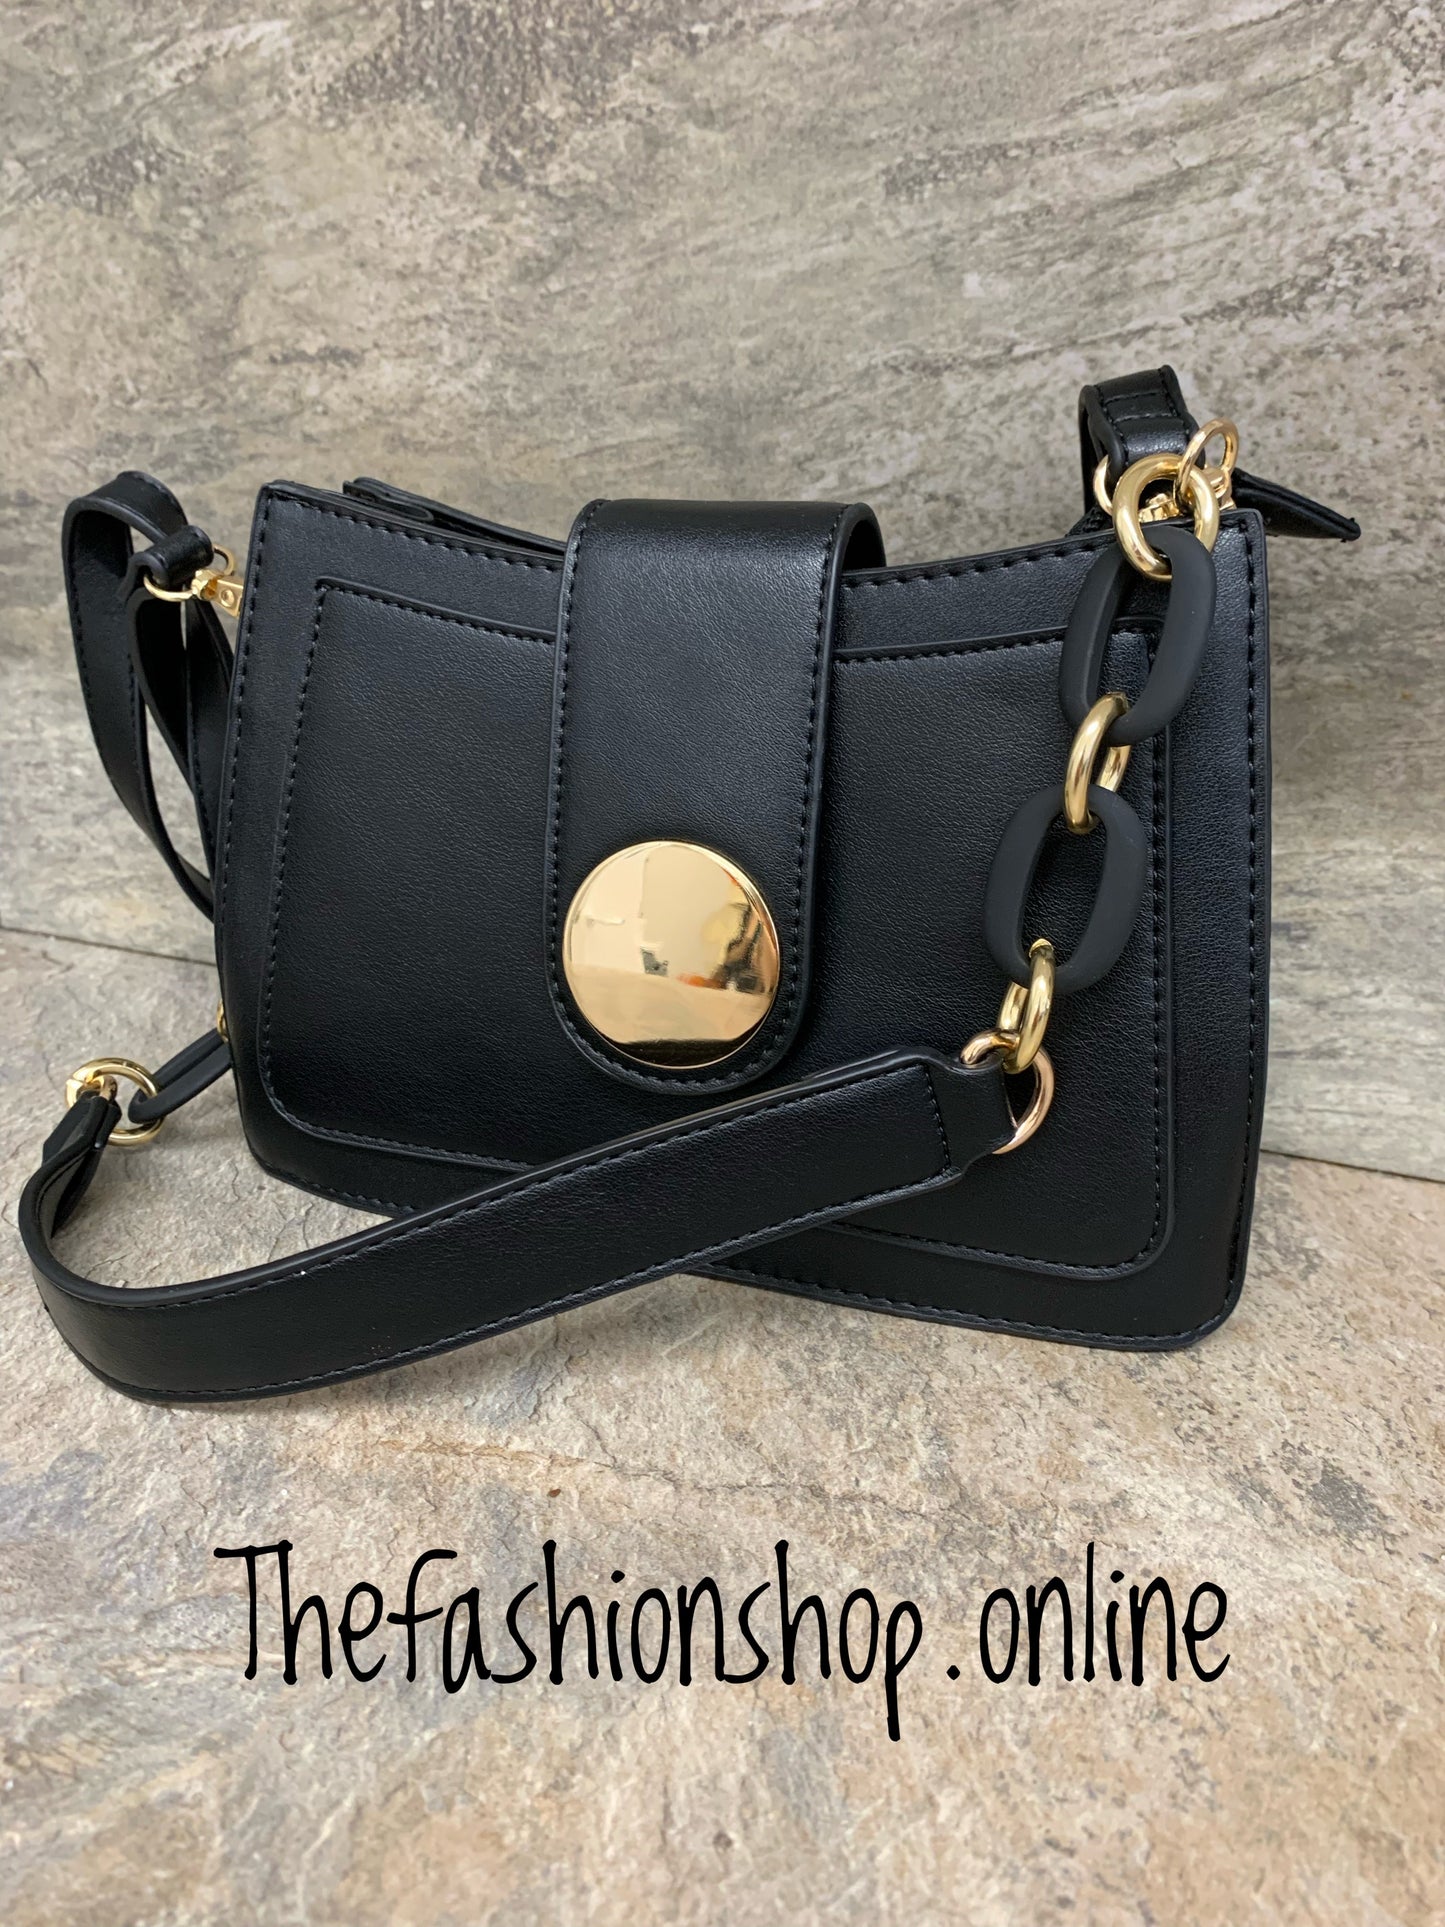 Black small disc bag with two straps